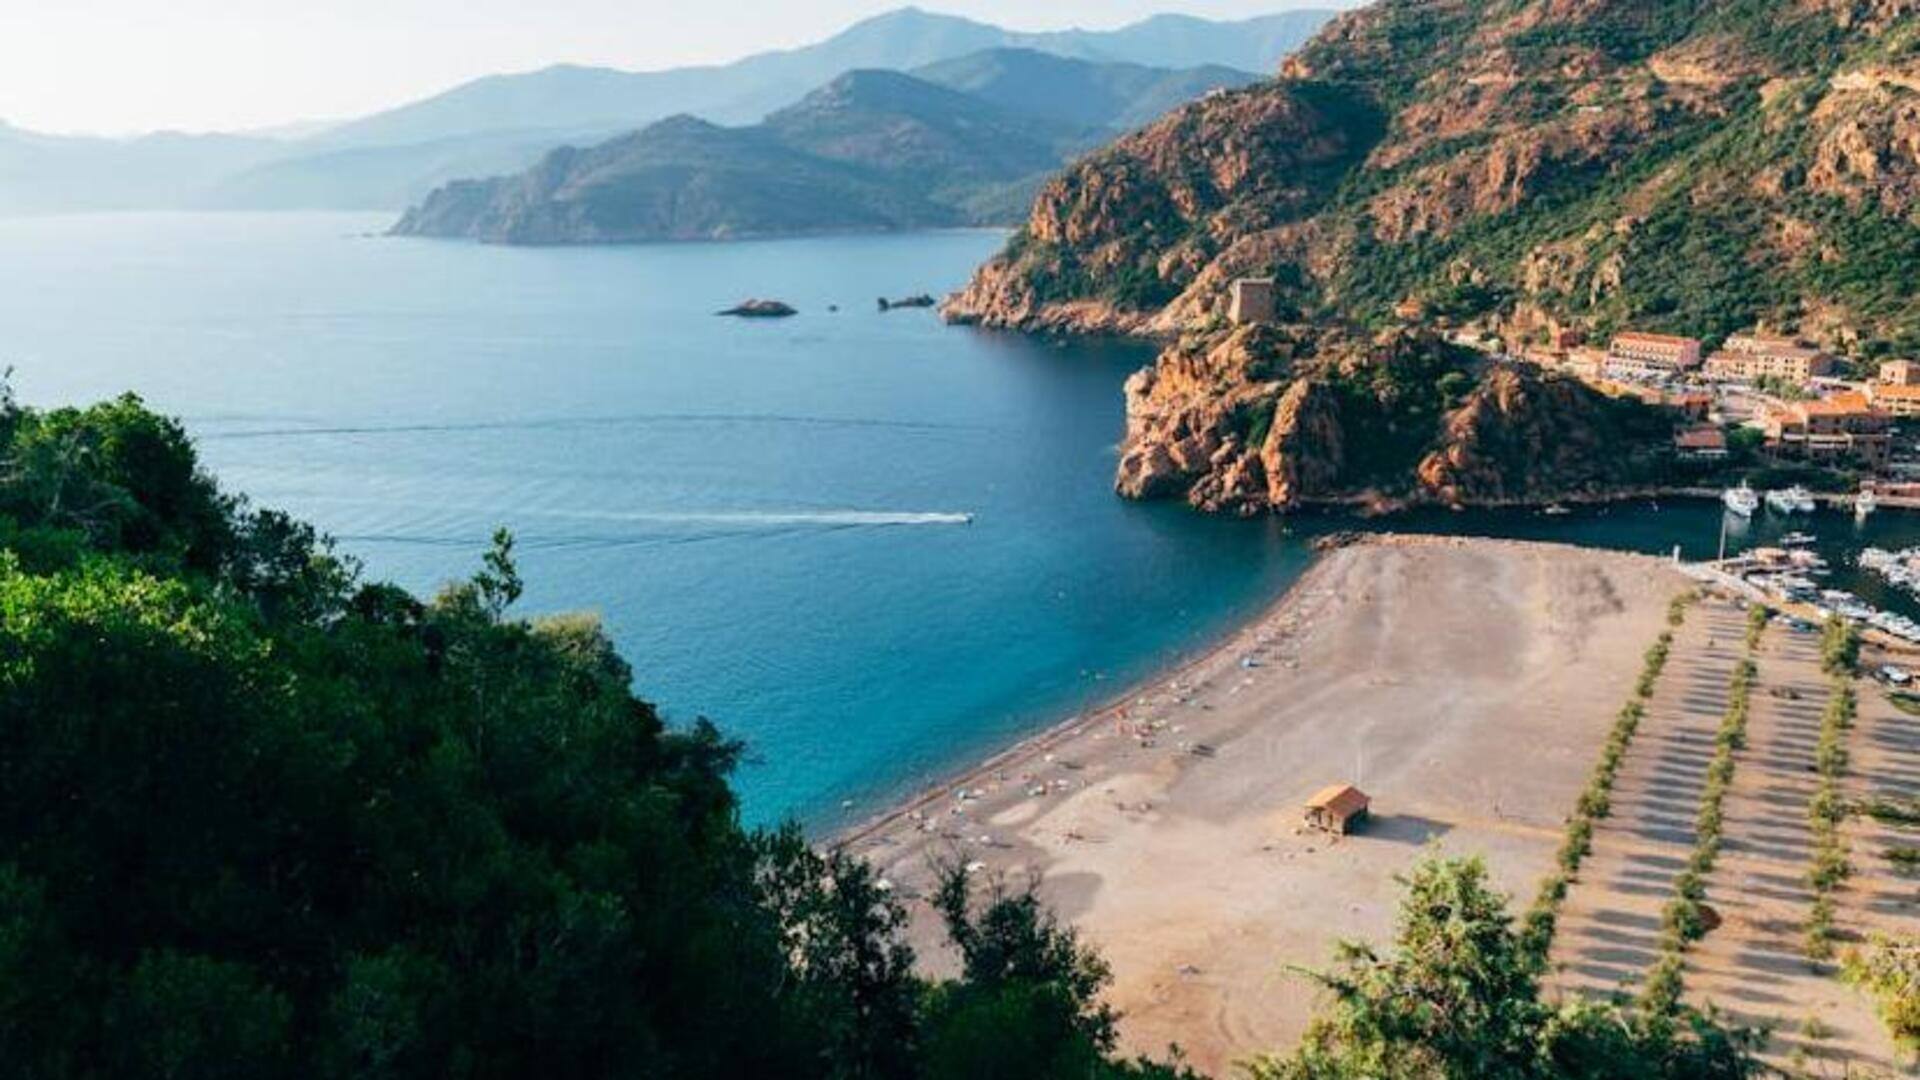 Explore Corsica's coastal charms with this guide